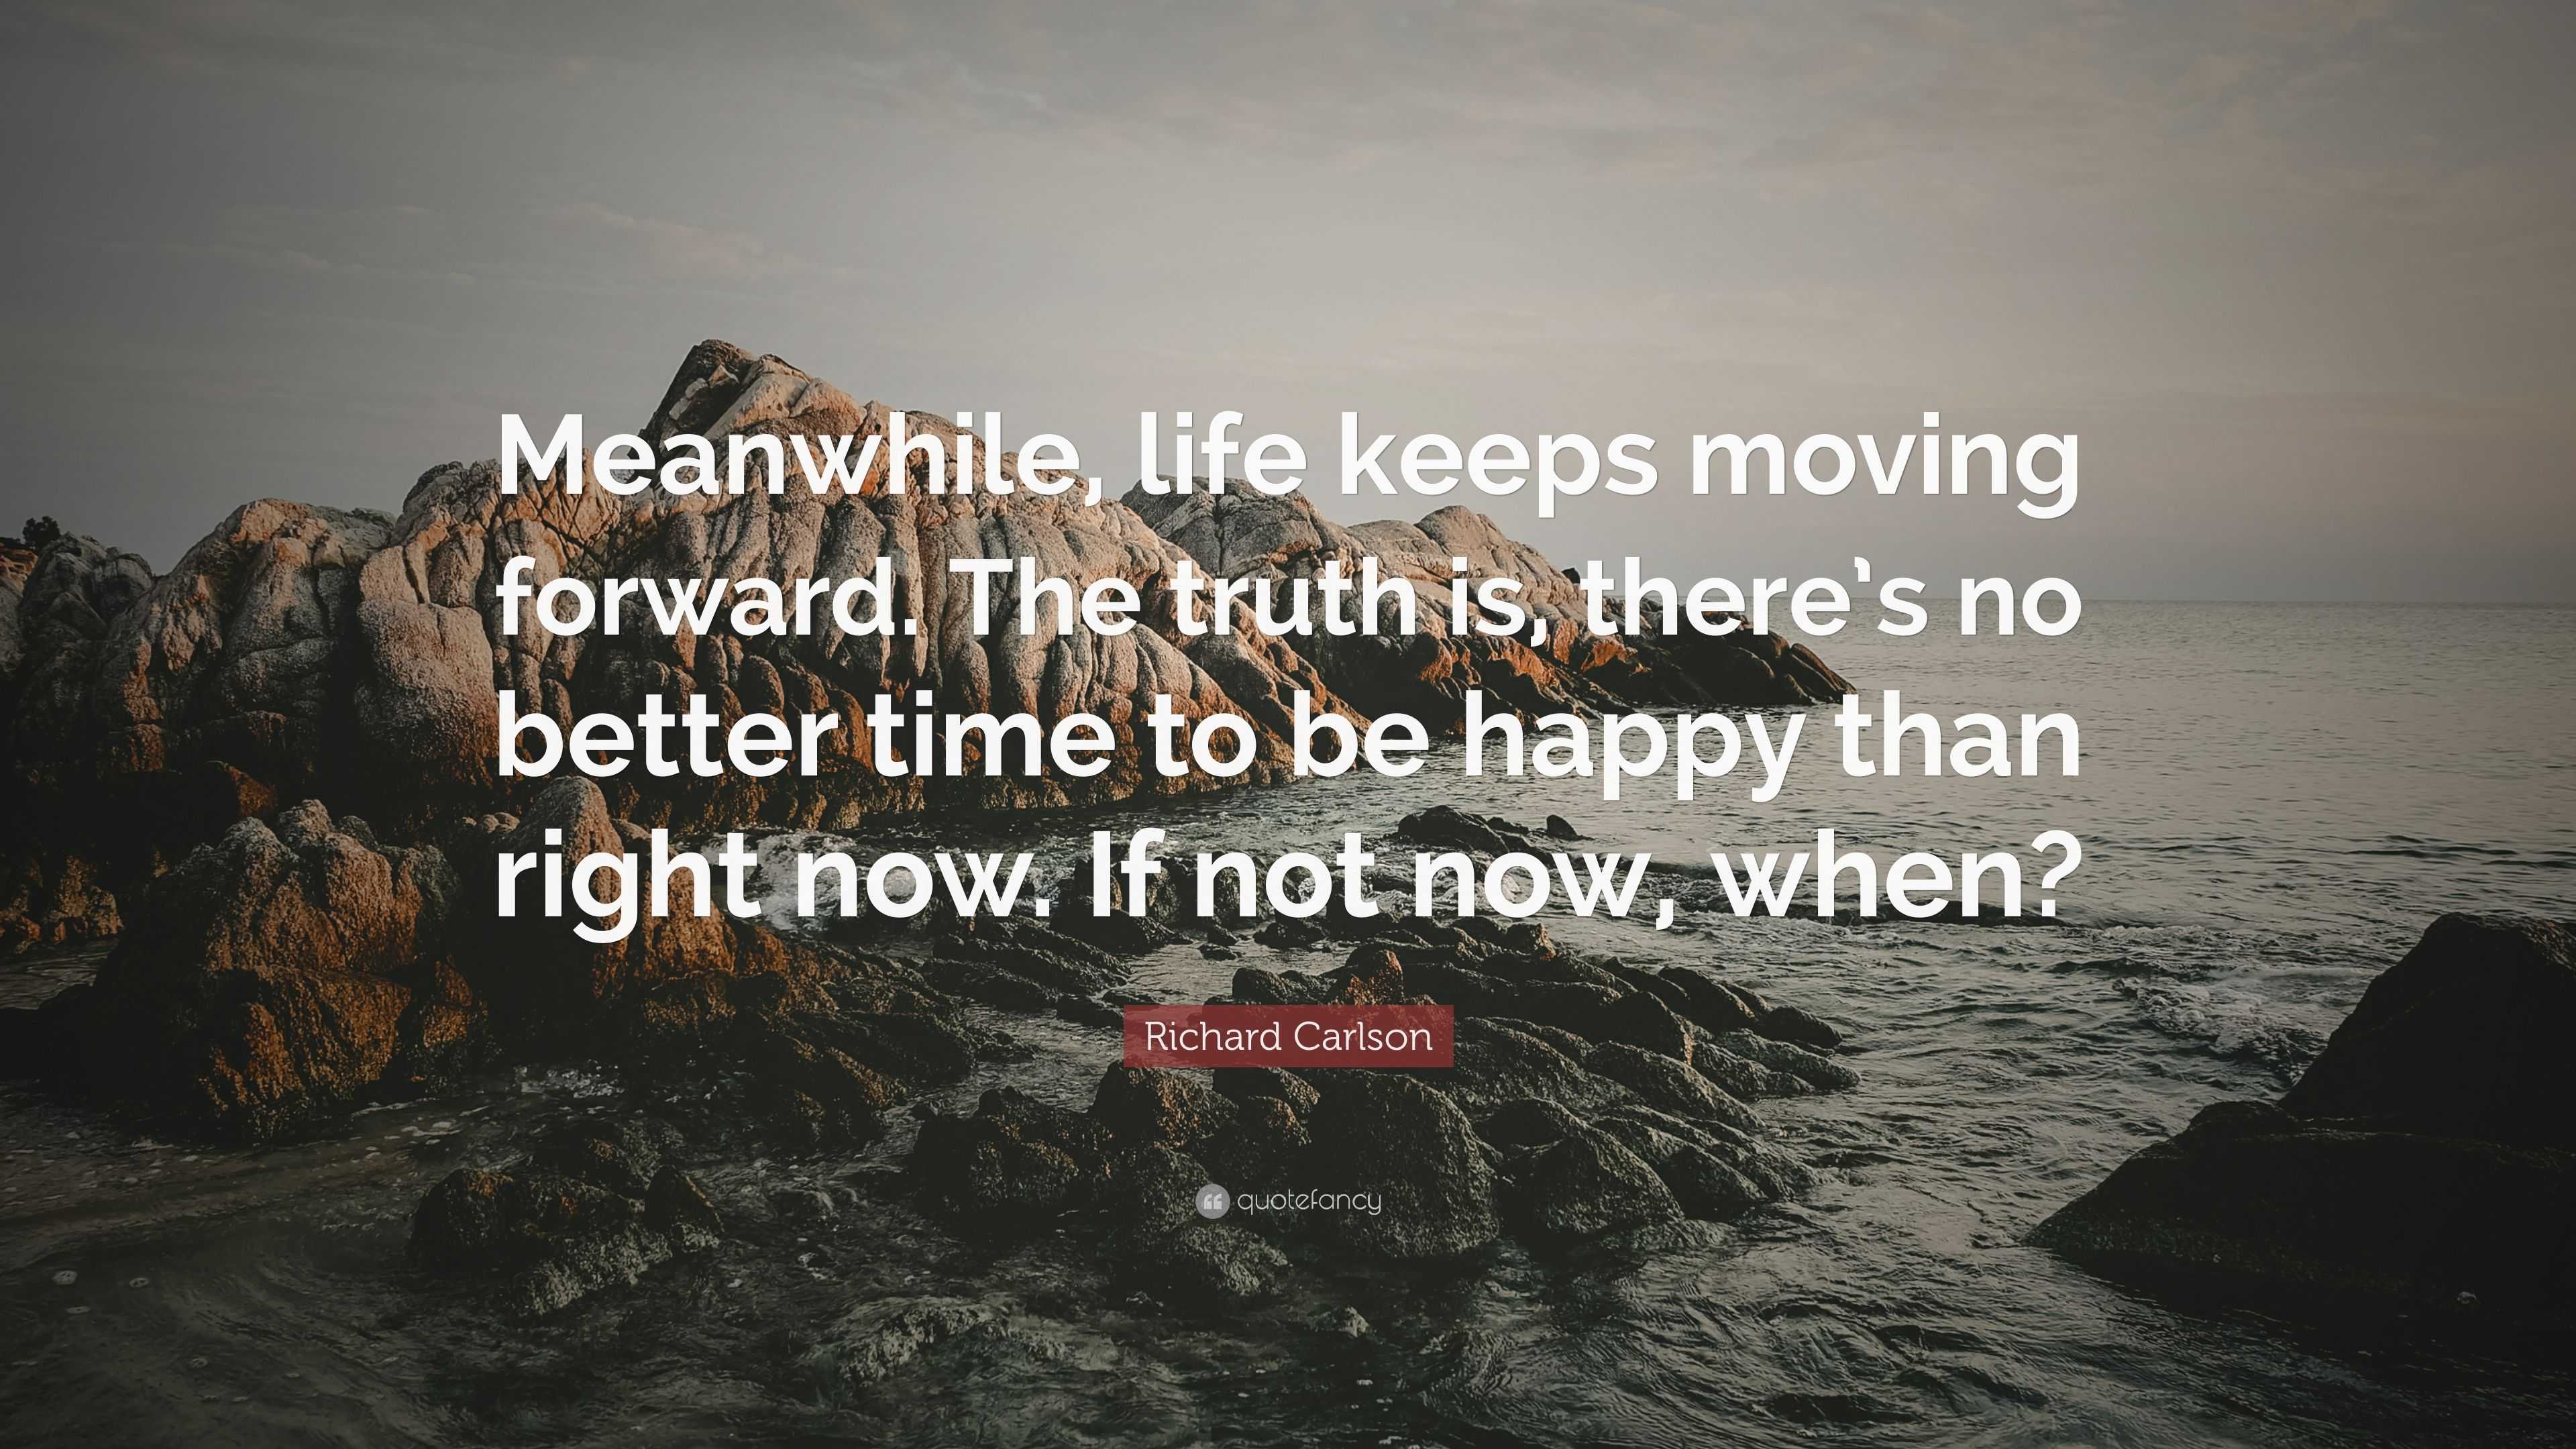 Richard Carlson Quote: “Meanwhile, life keeps moving forward. The truth ...